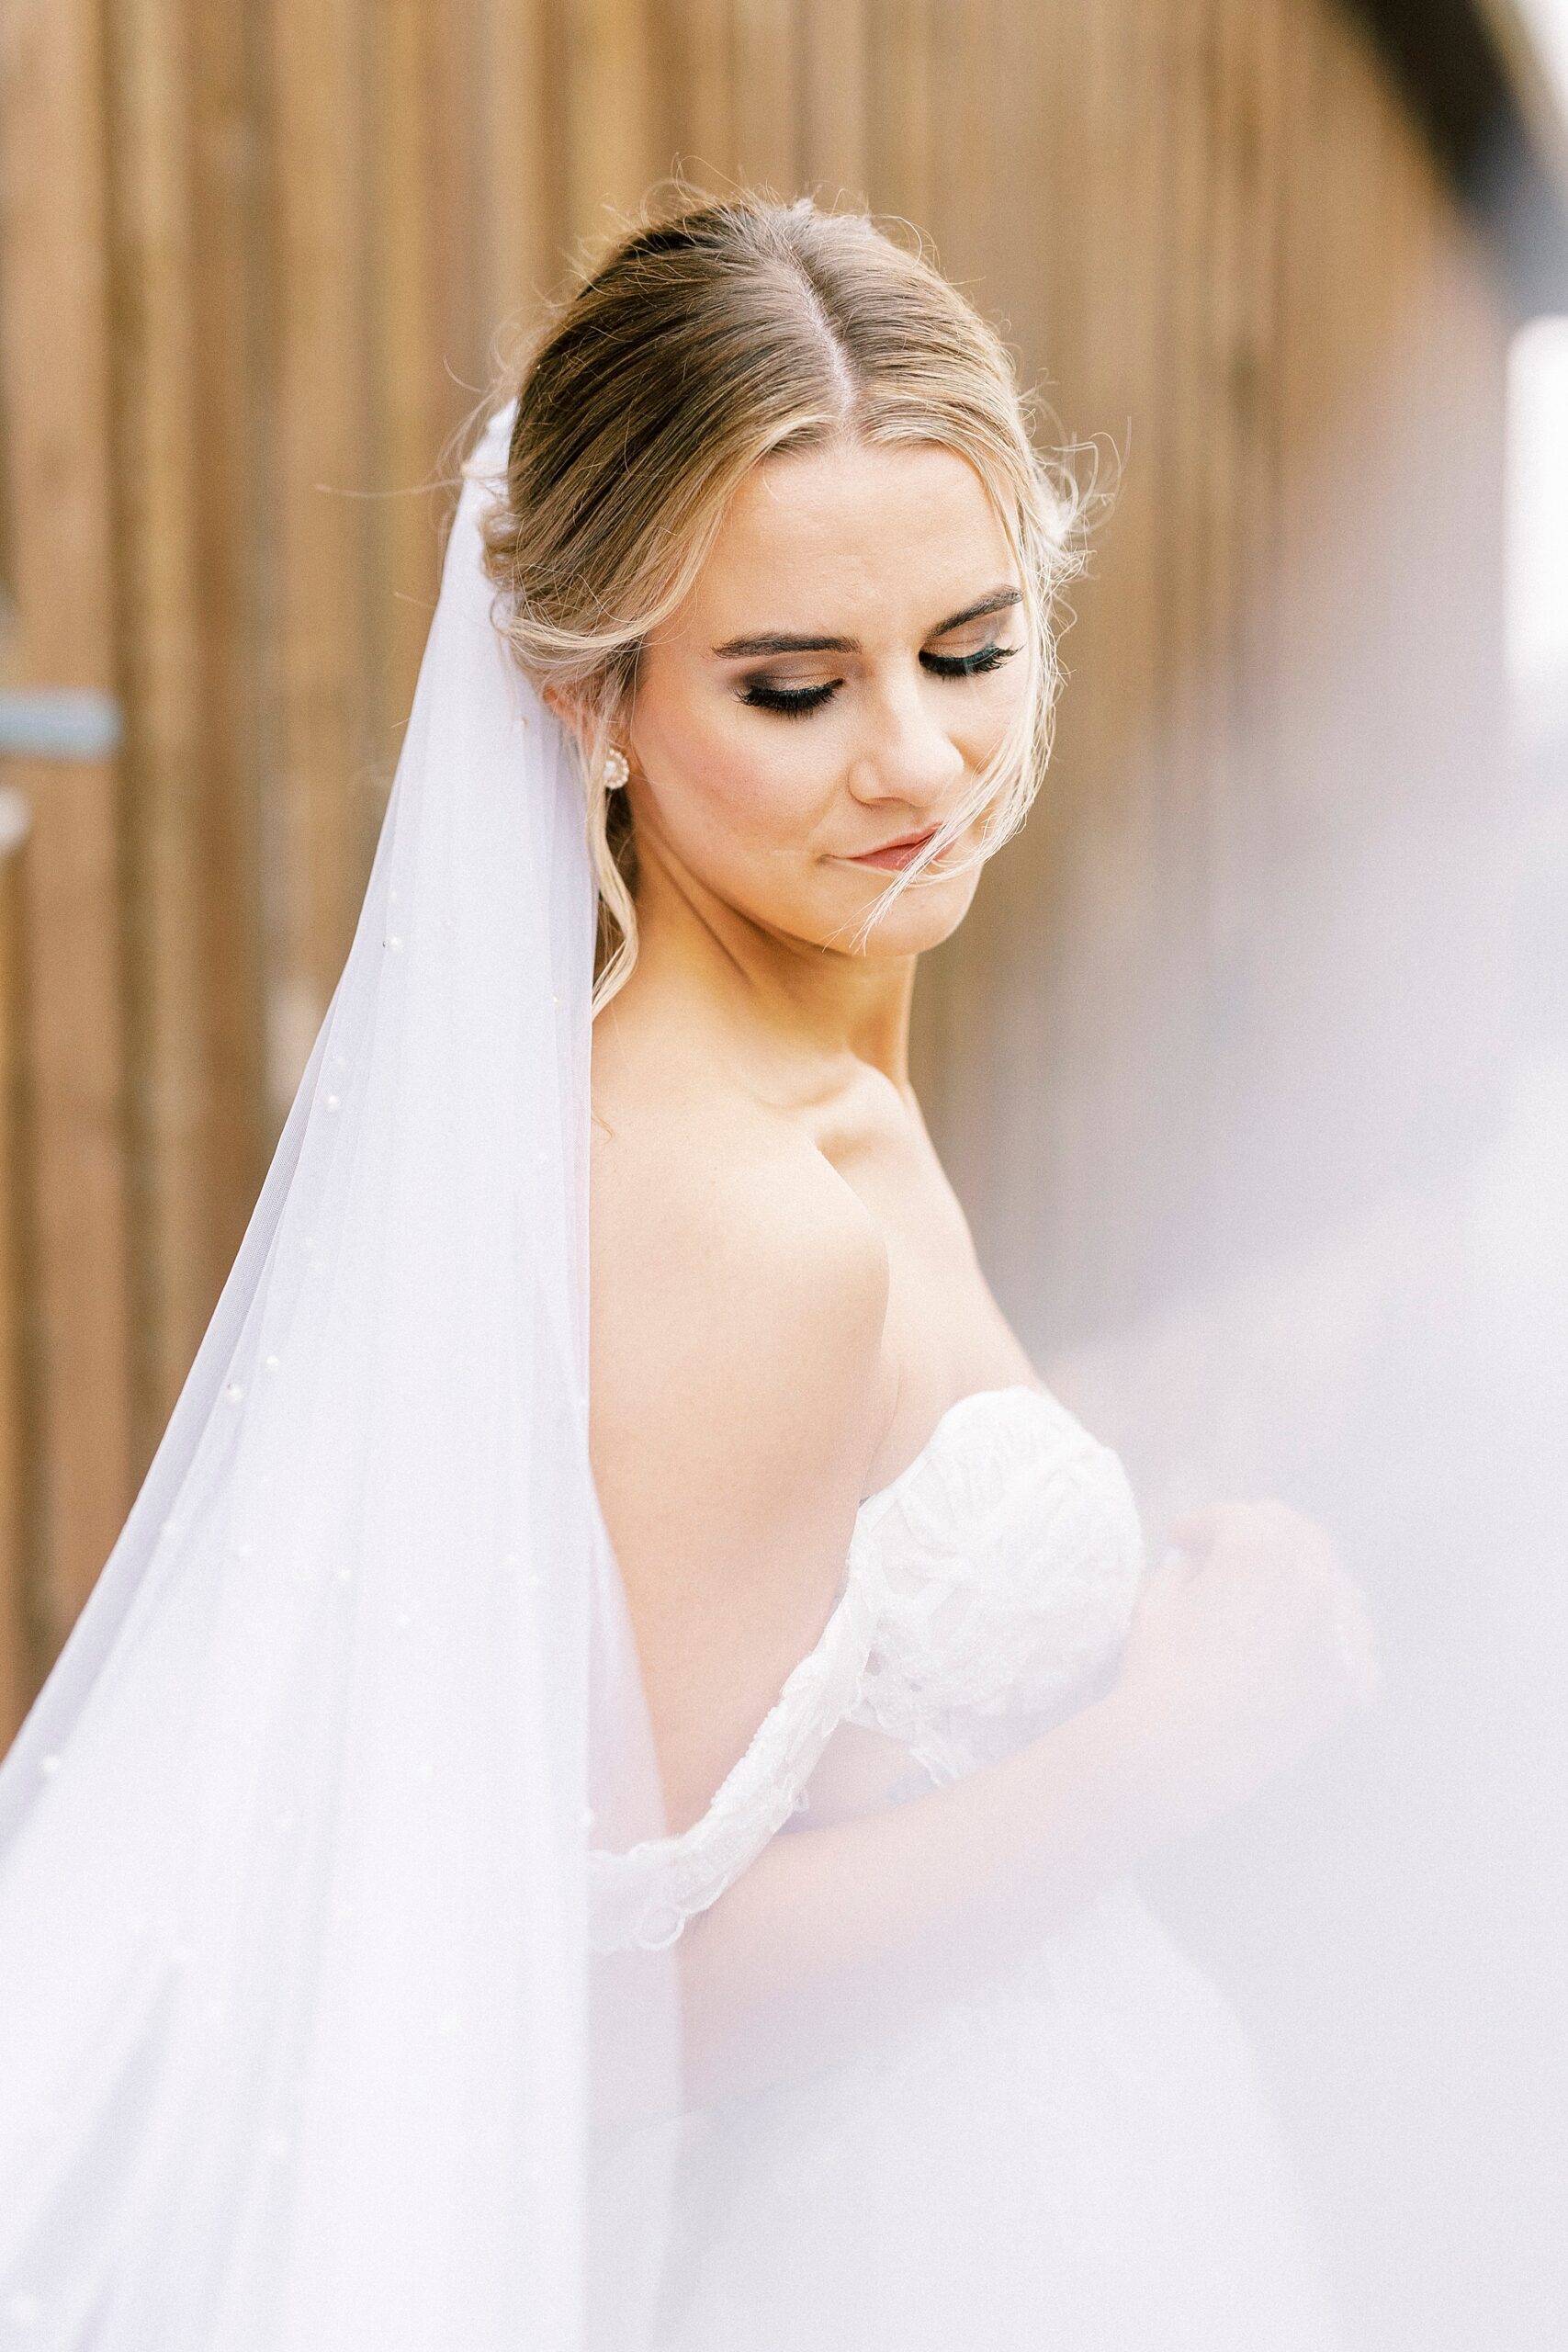 bride looks down with veil pulled up by her during bridal portraits 